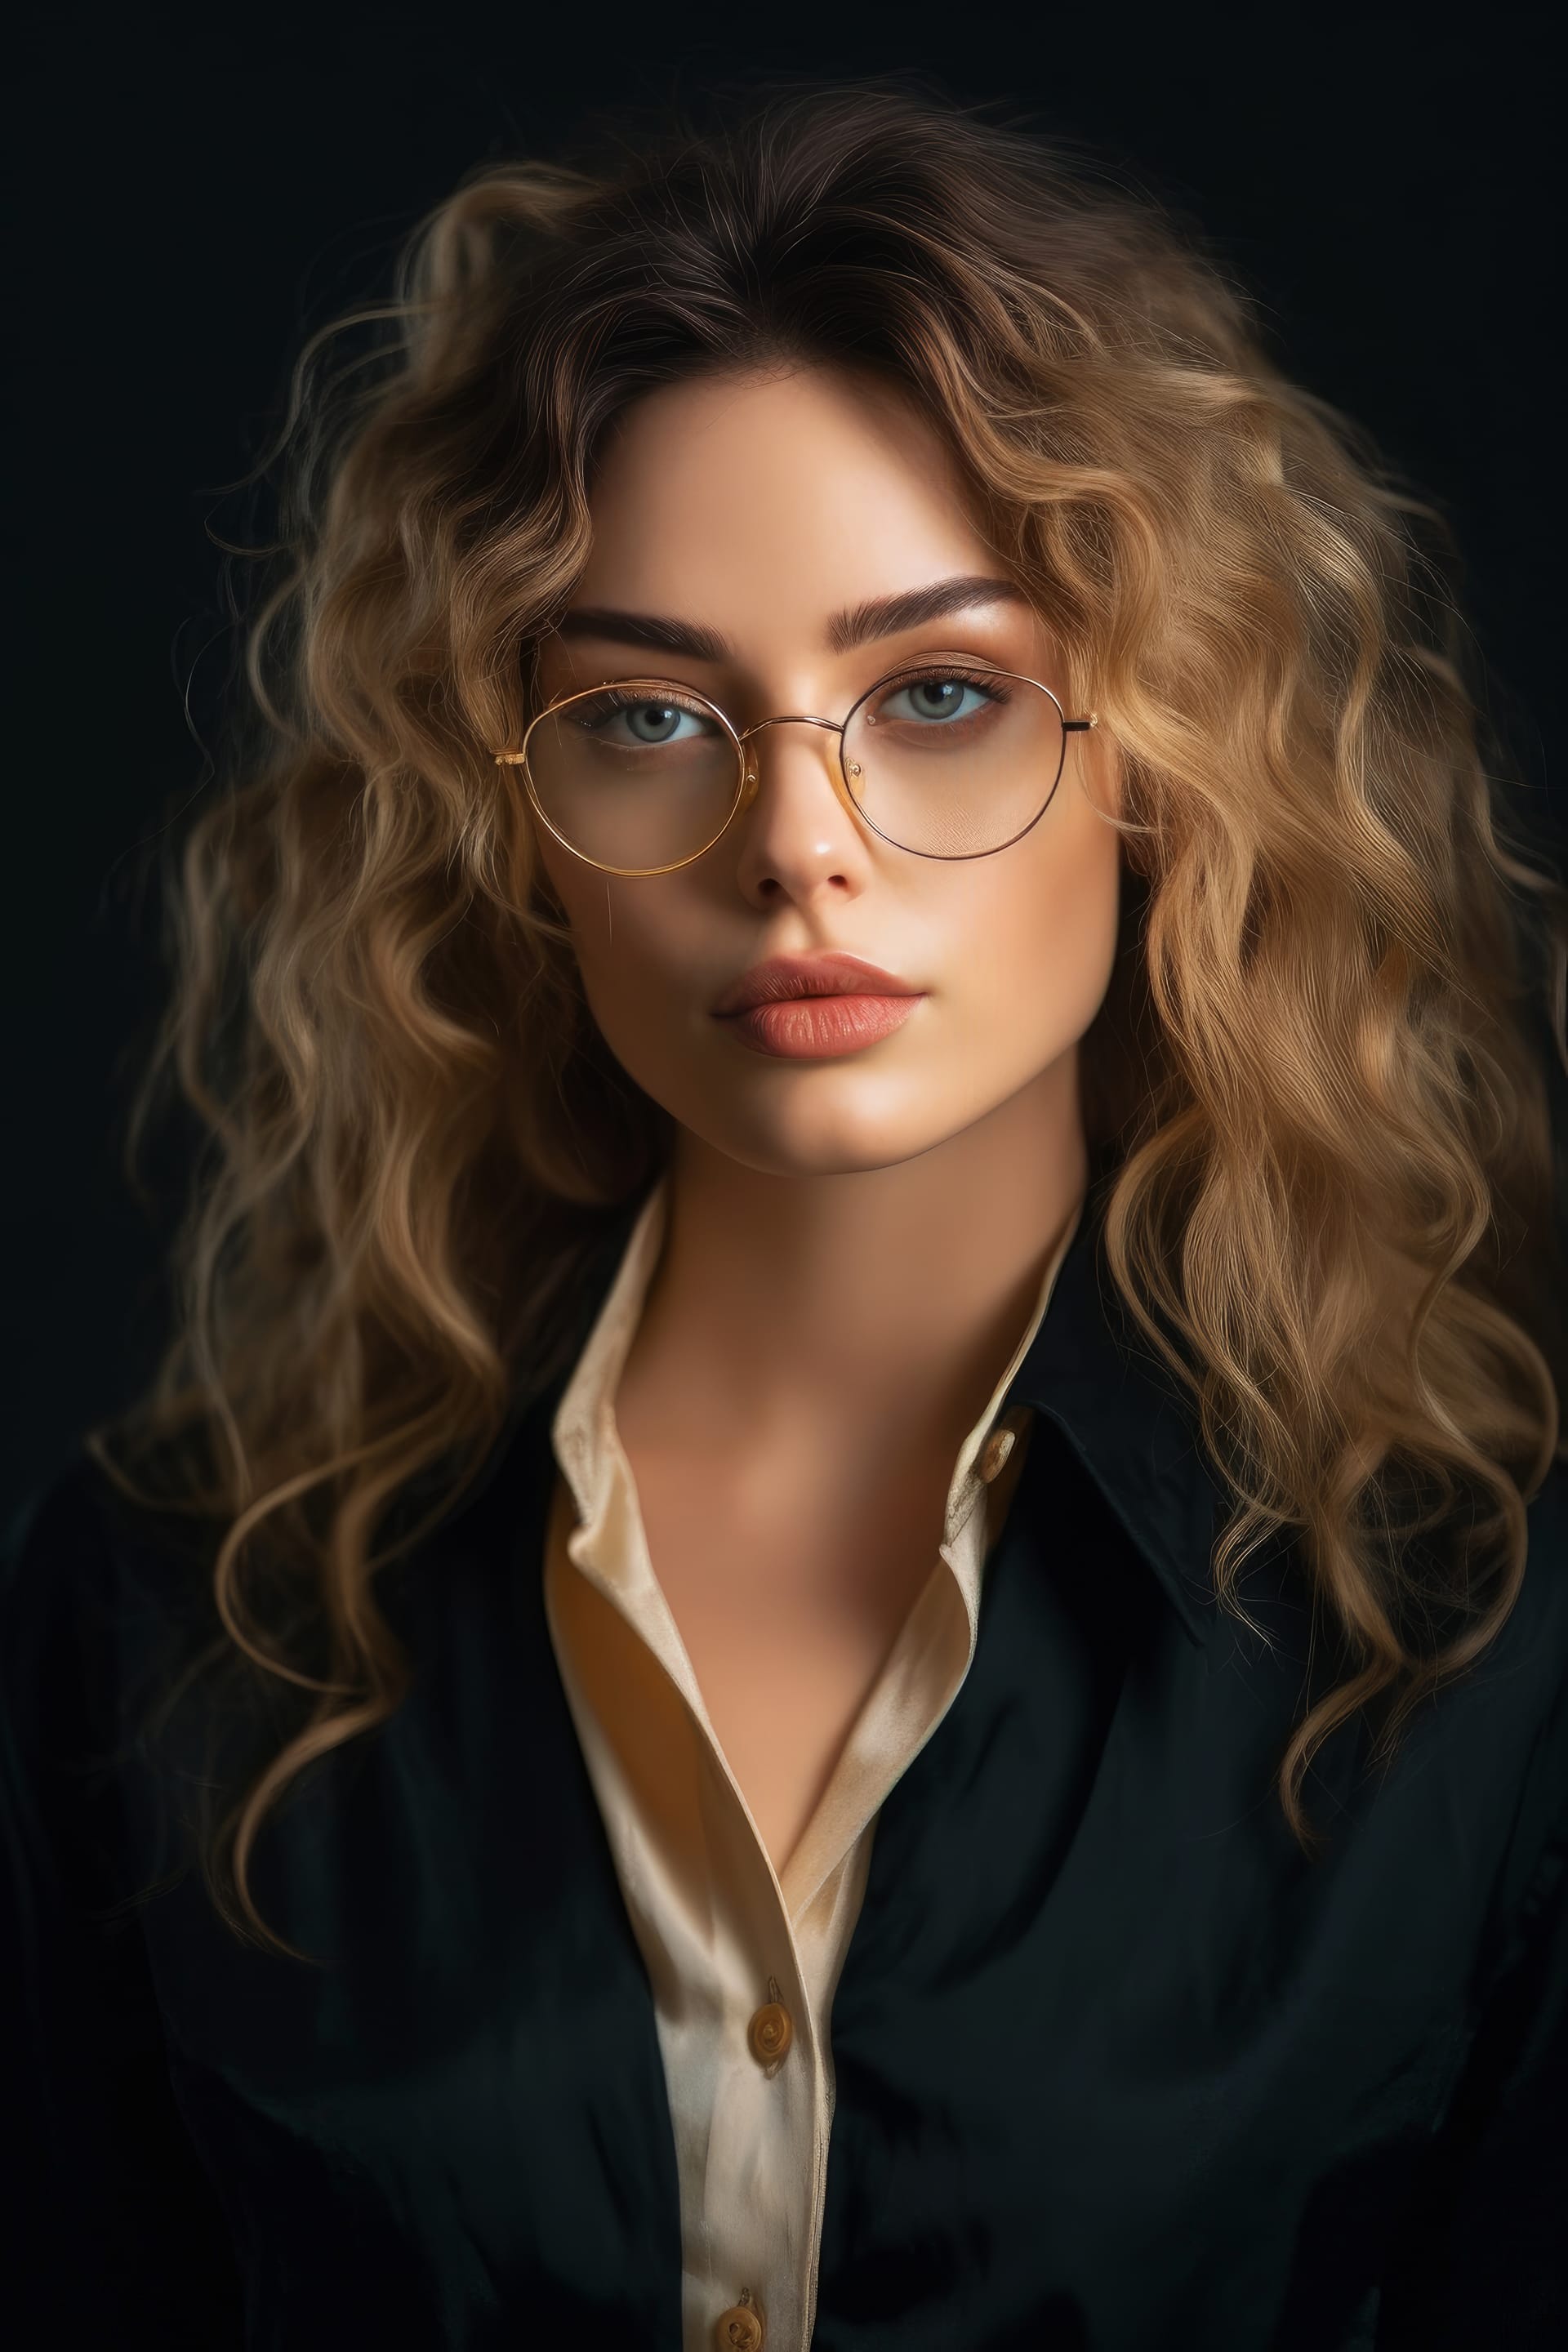 Woman with glasses beautiful portrait excellent picture